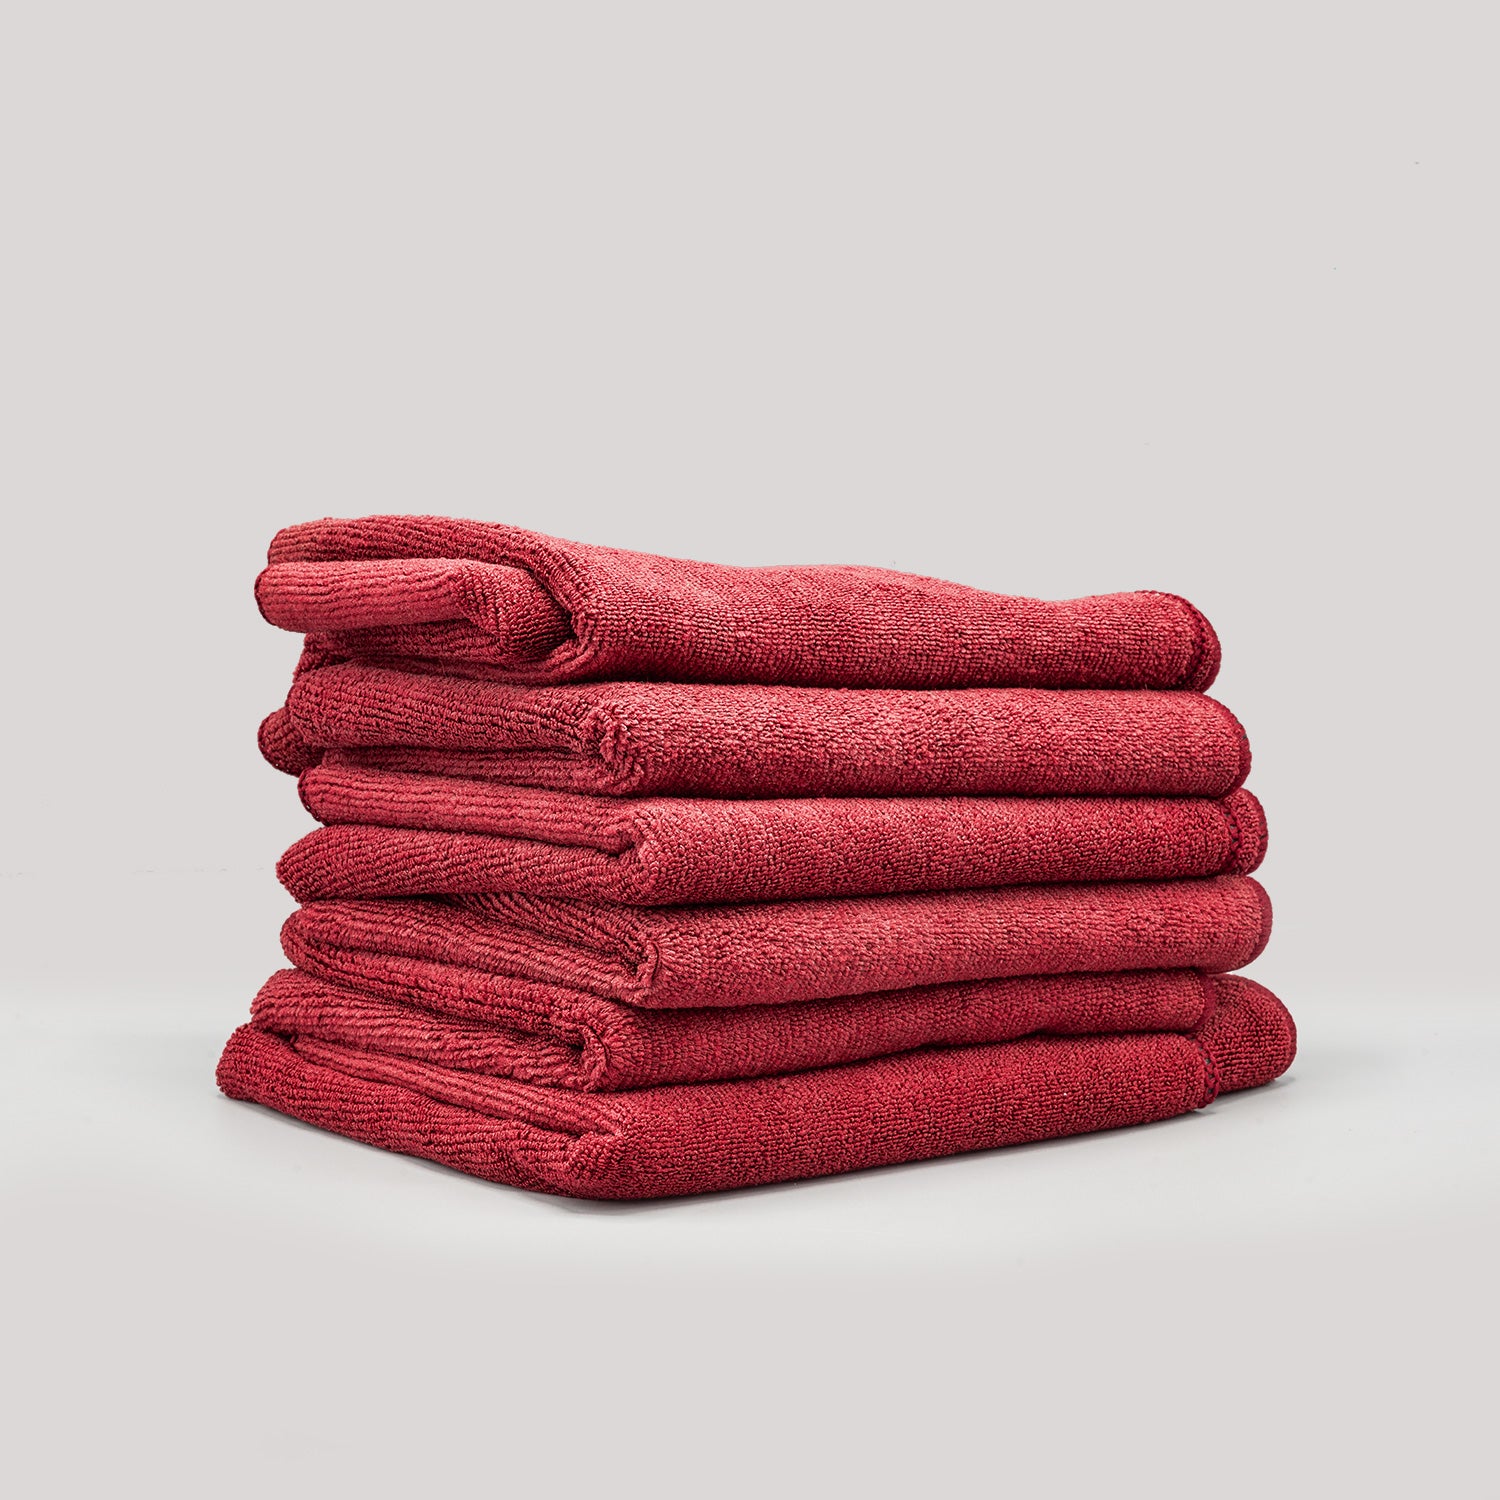 American Textile Industries Red Shop Towels - 50 pack 4238003